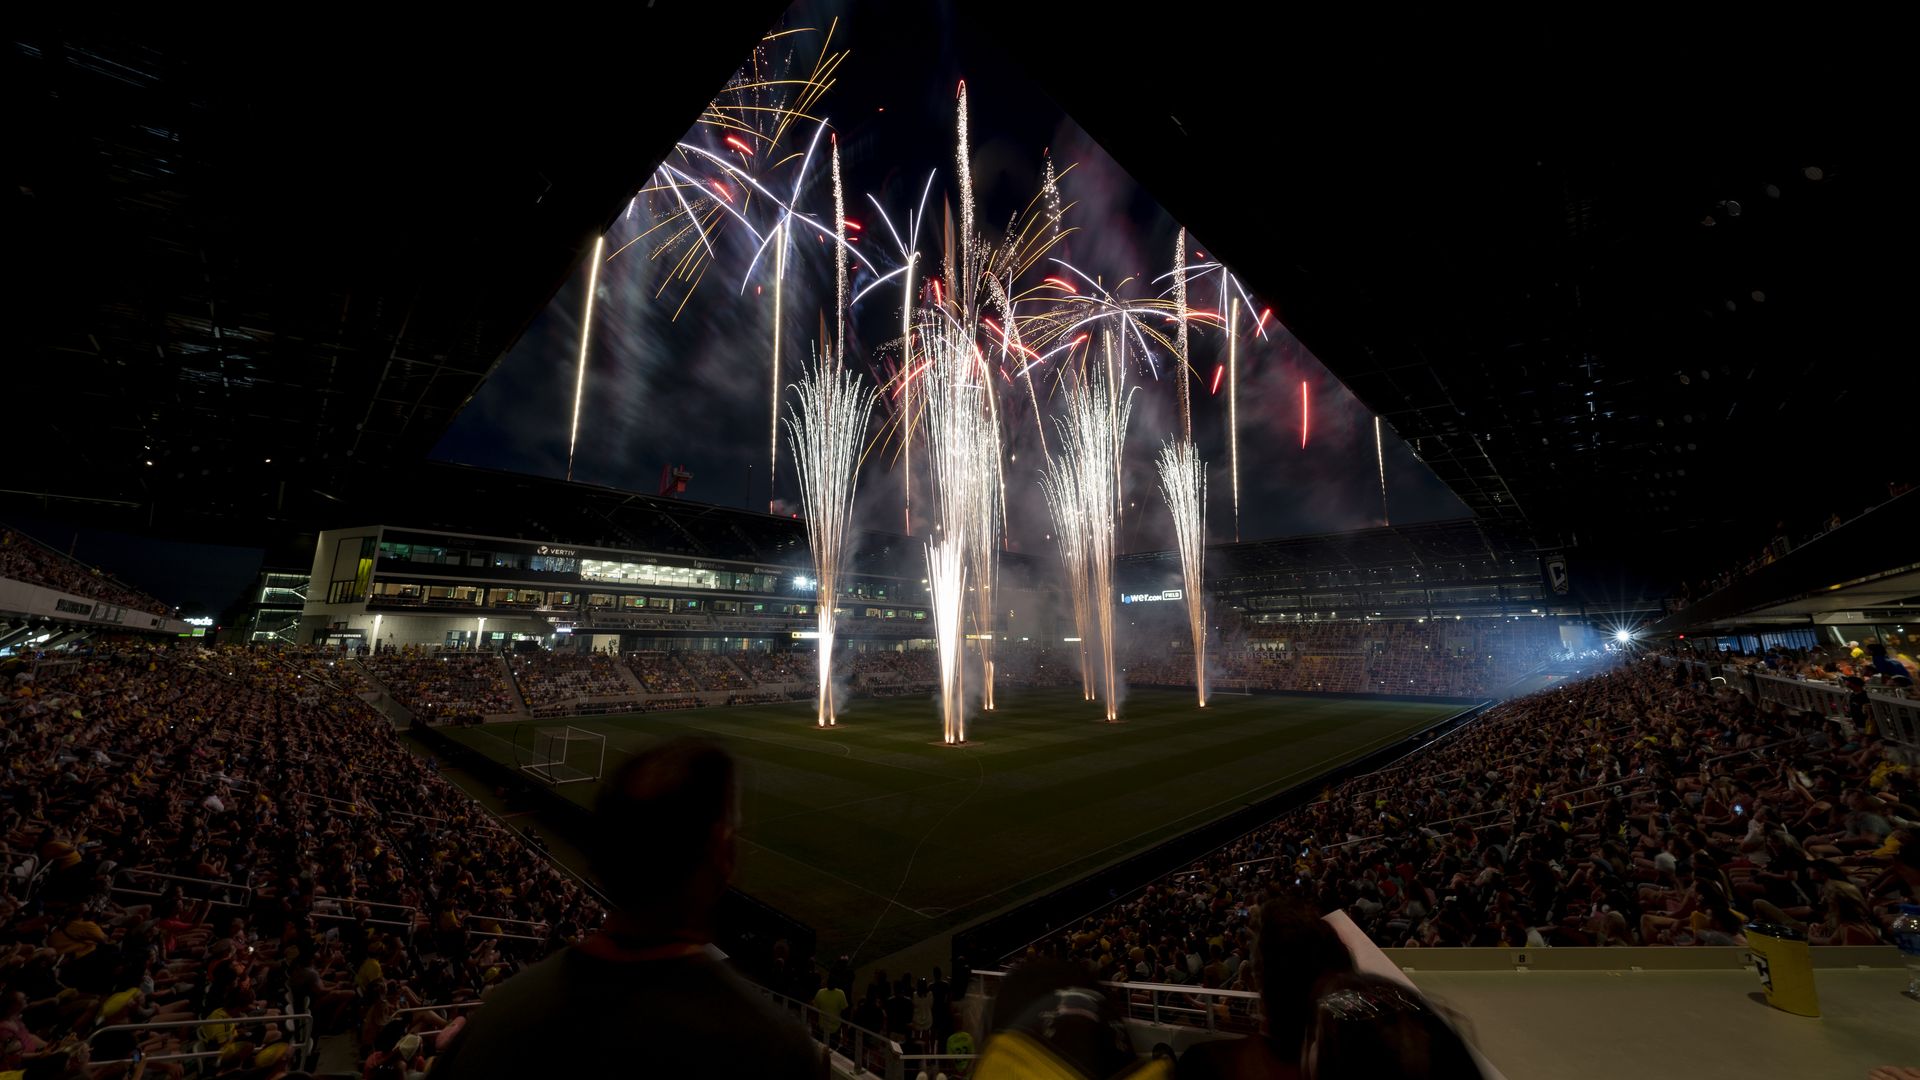 Fireworks are set off after a Columbus Crew game.